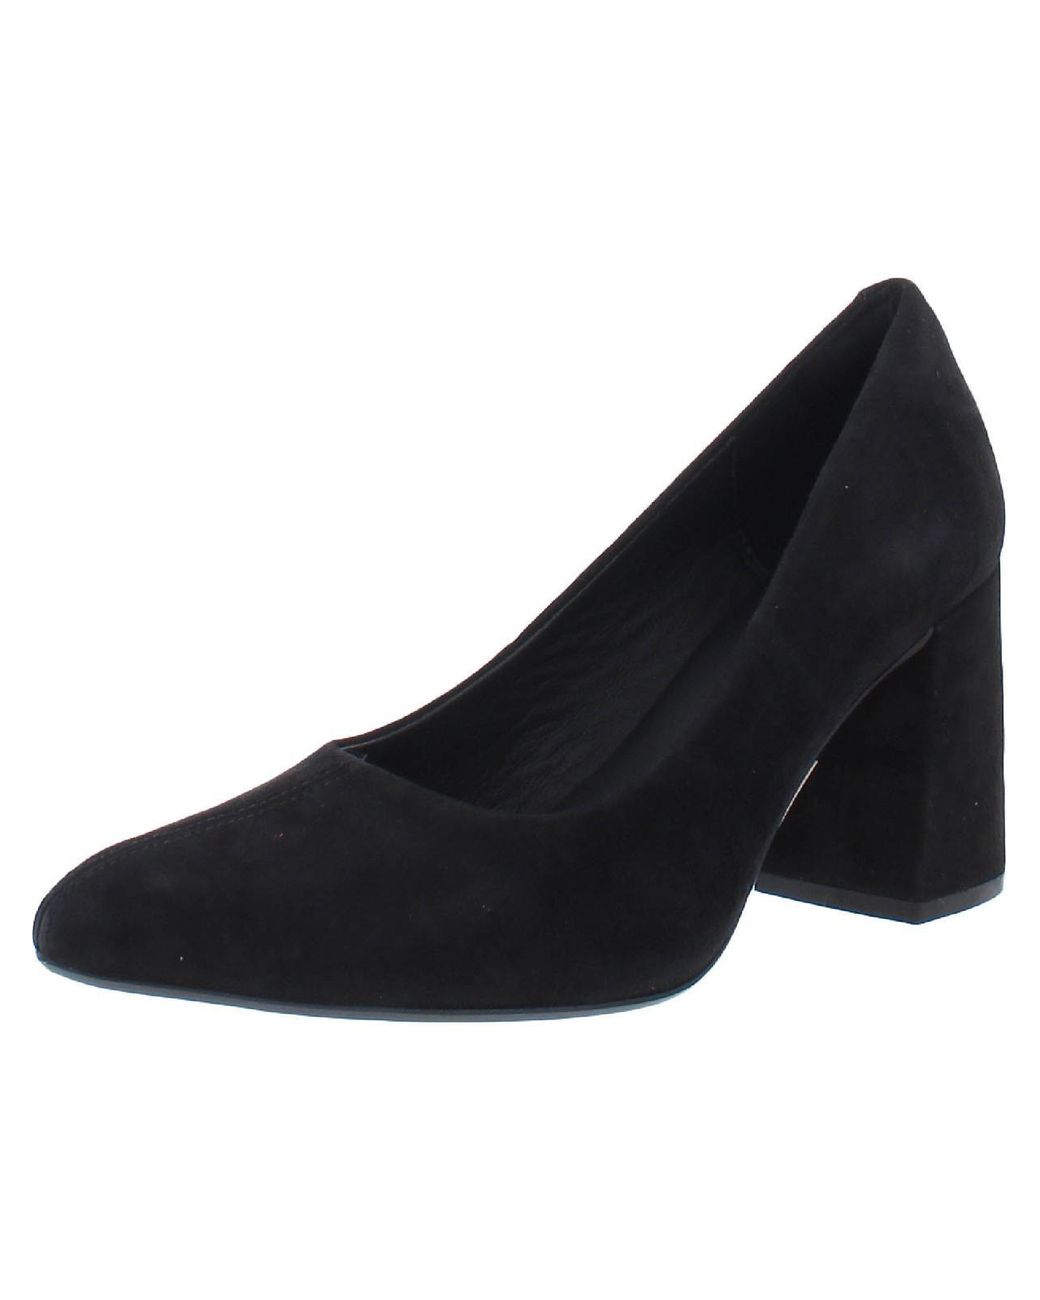 Clarks Laina85 Court Suede Dressy Pumps in Black | Lyst